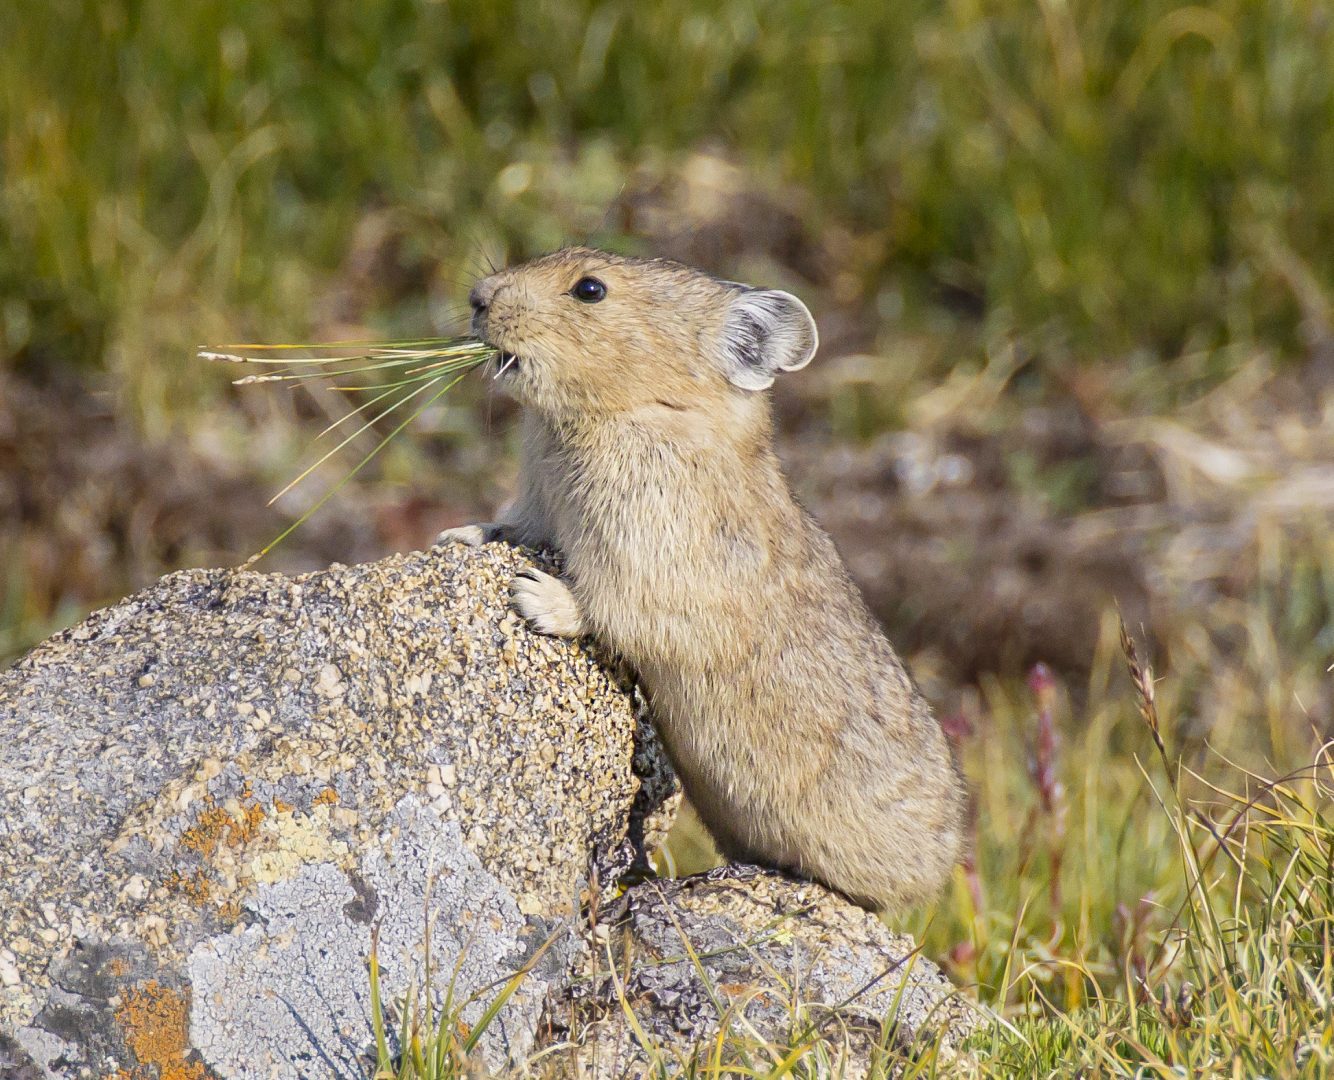 Pika with grass in mouth at Rock Cut during late summer.